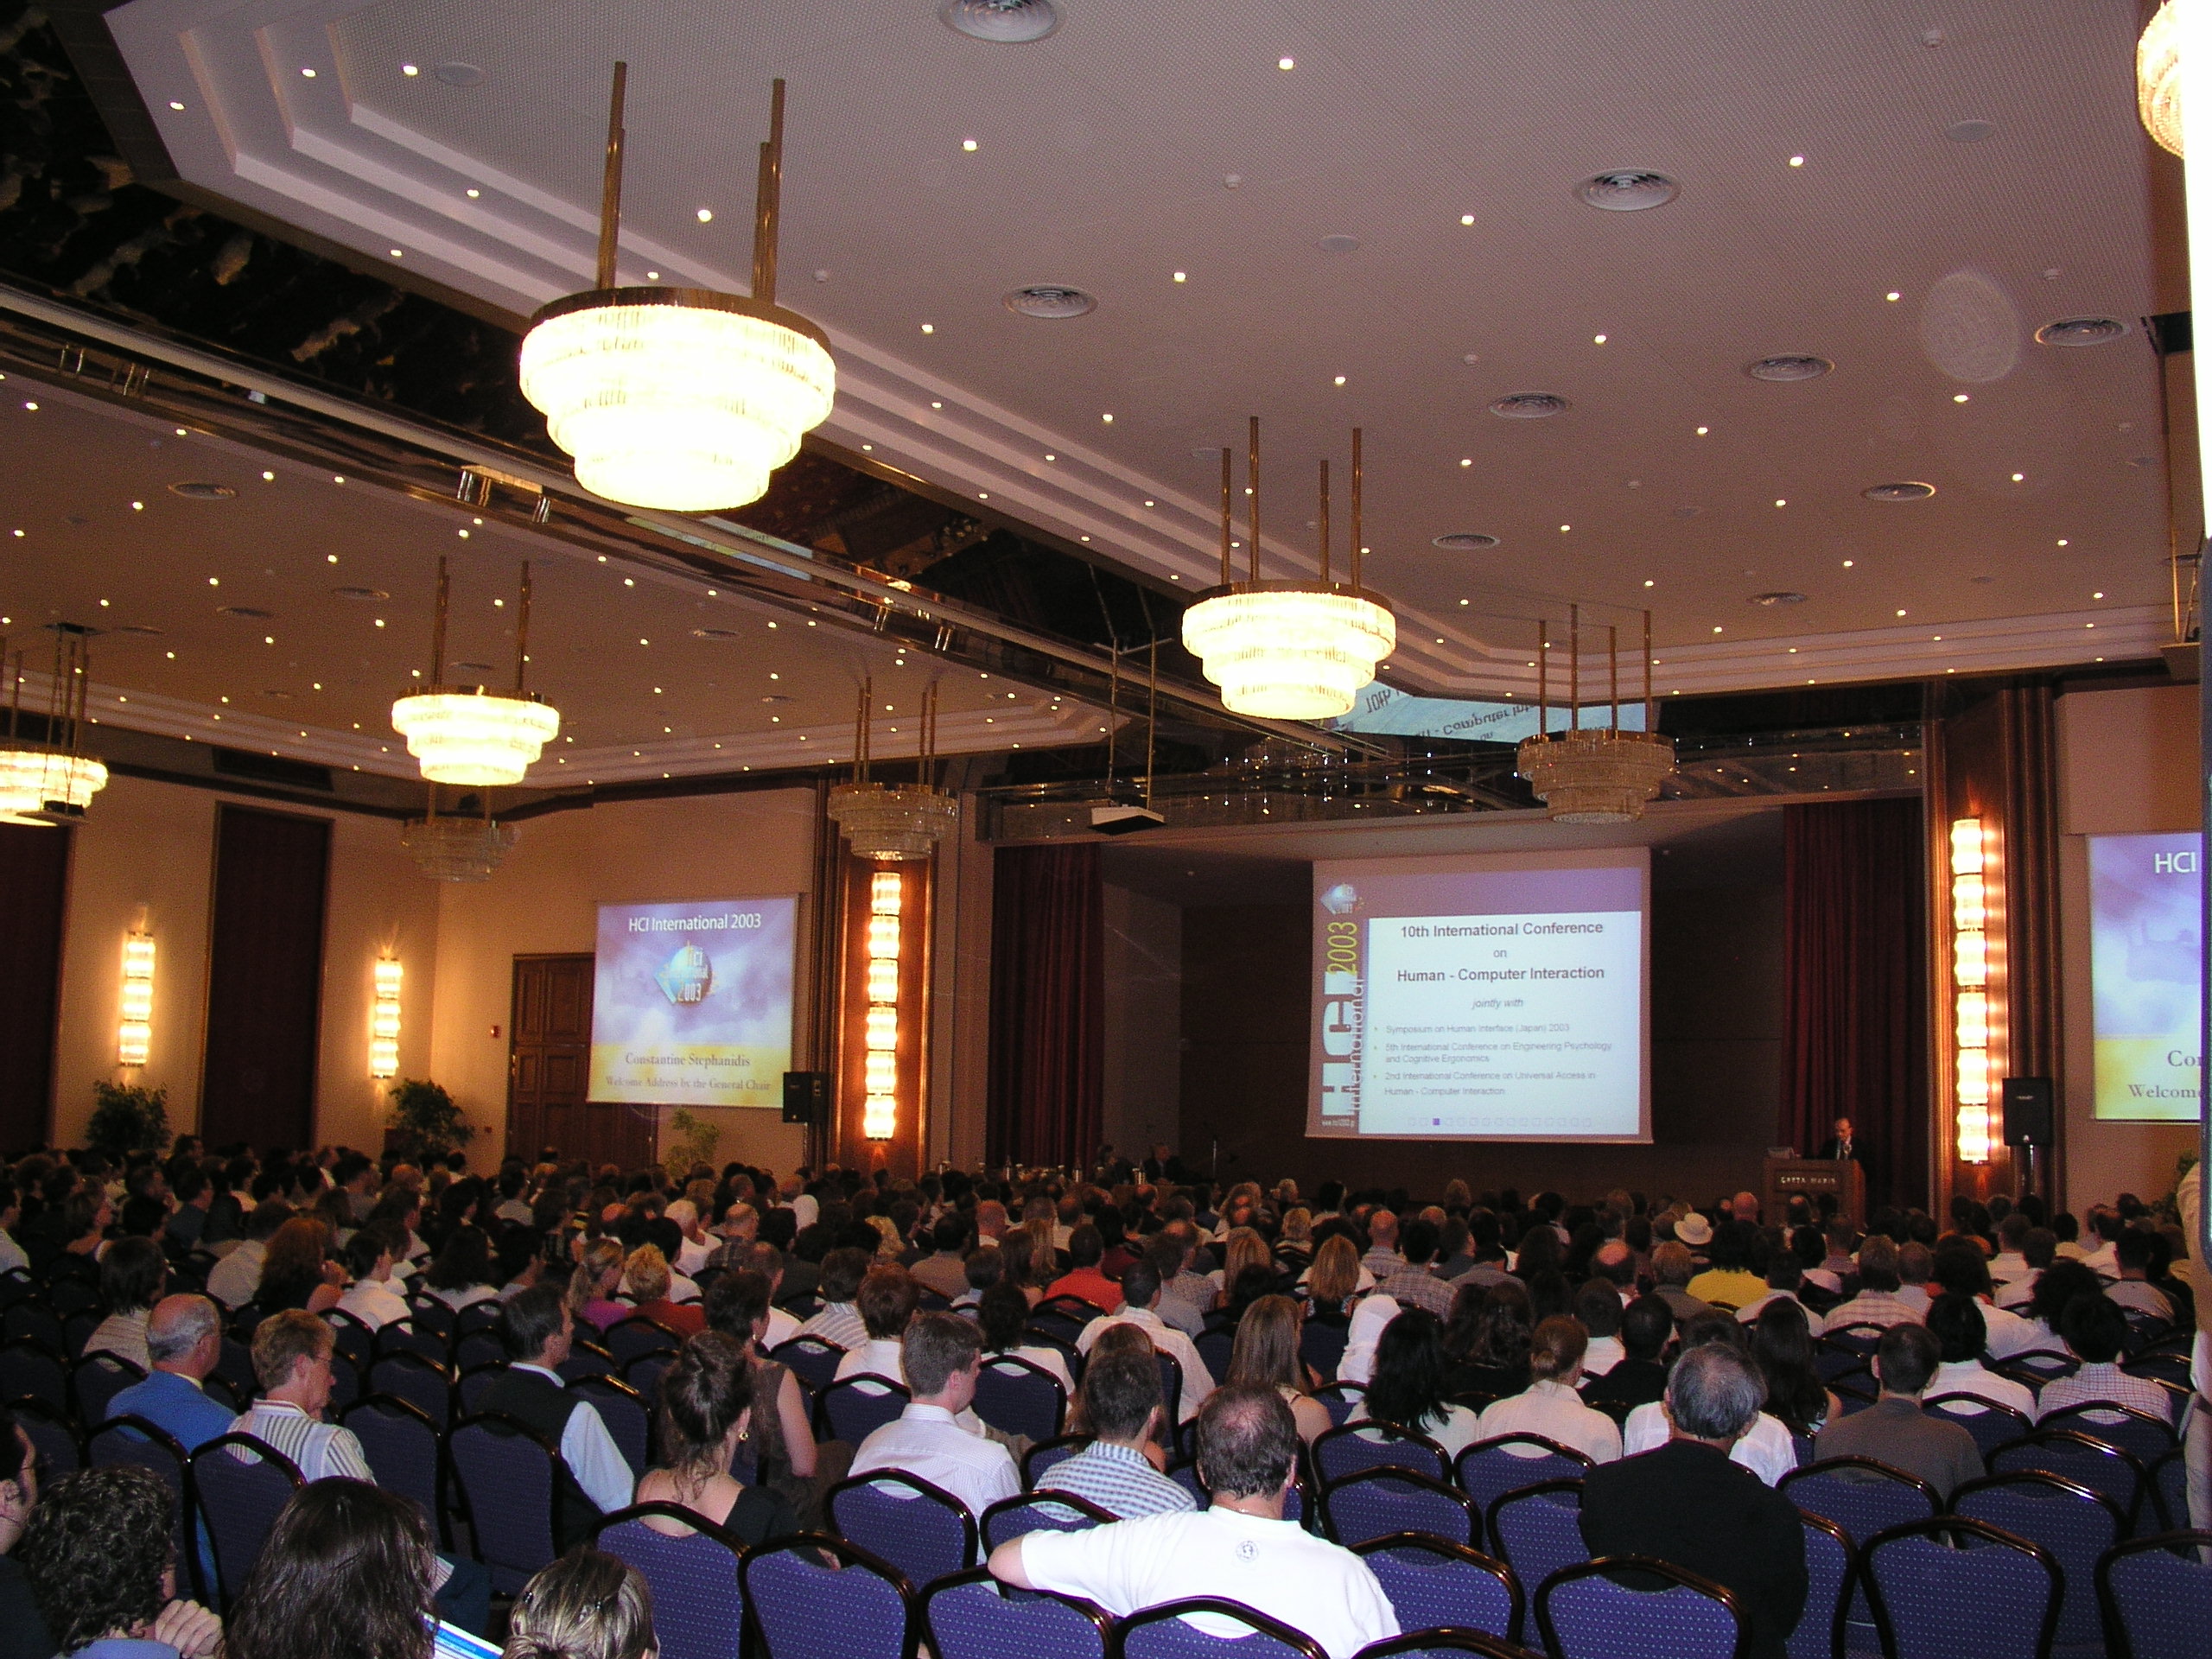 Opening session